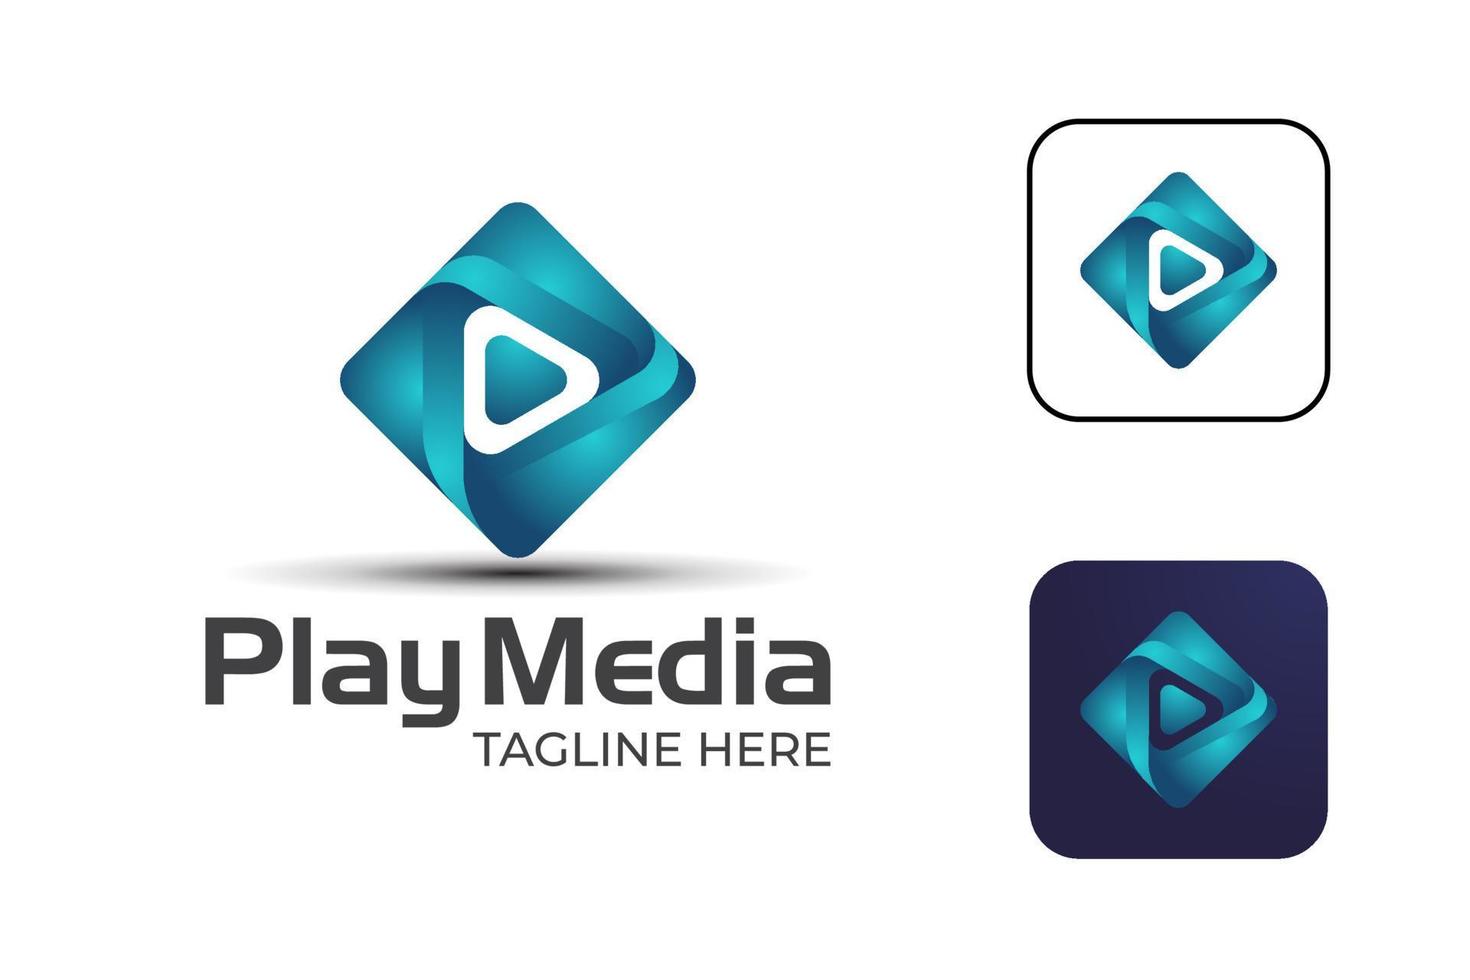 pixel play media logo design with button icon, symbol for studio music, video player multimedia gradient icon vector